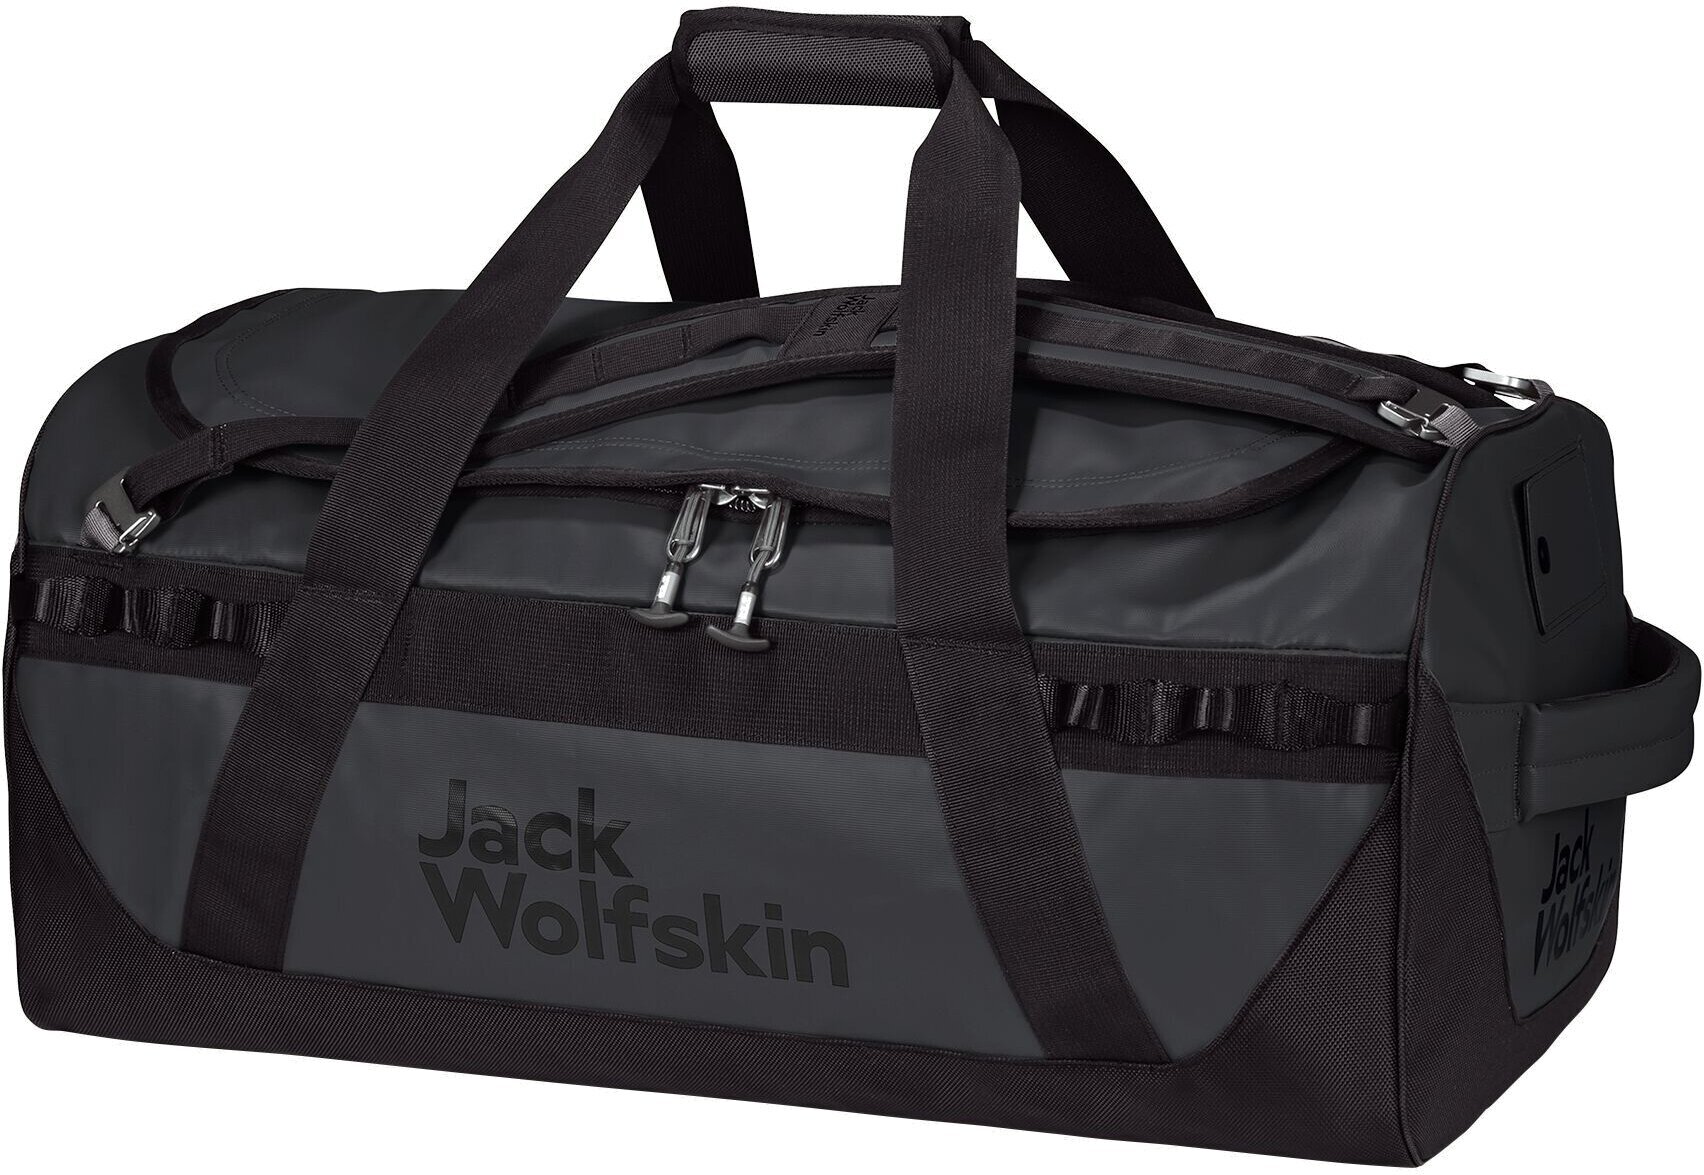 Outdoor Sac à dos Jack Wolfskin Expedition Trunk 65 Black Une seule taille Outdoor Sac à dos